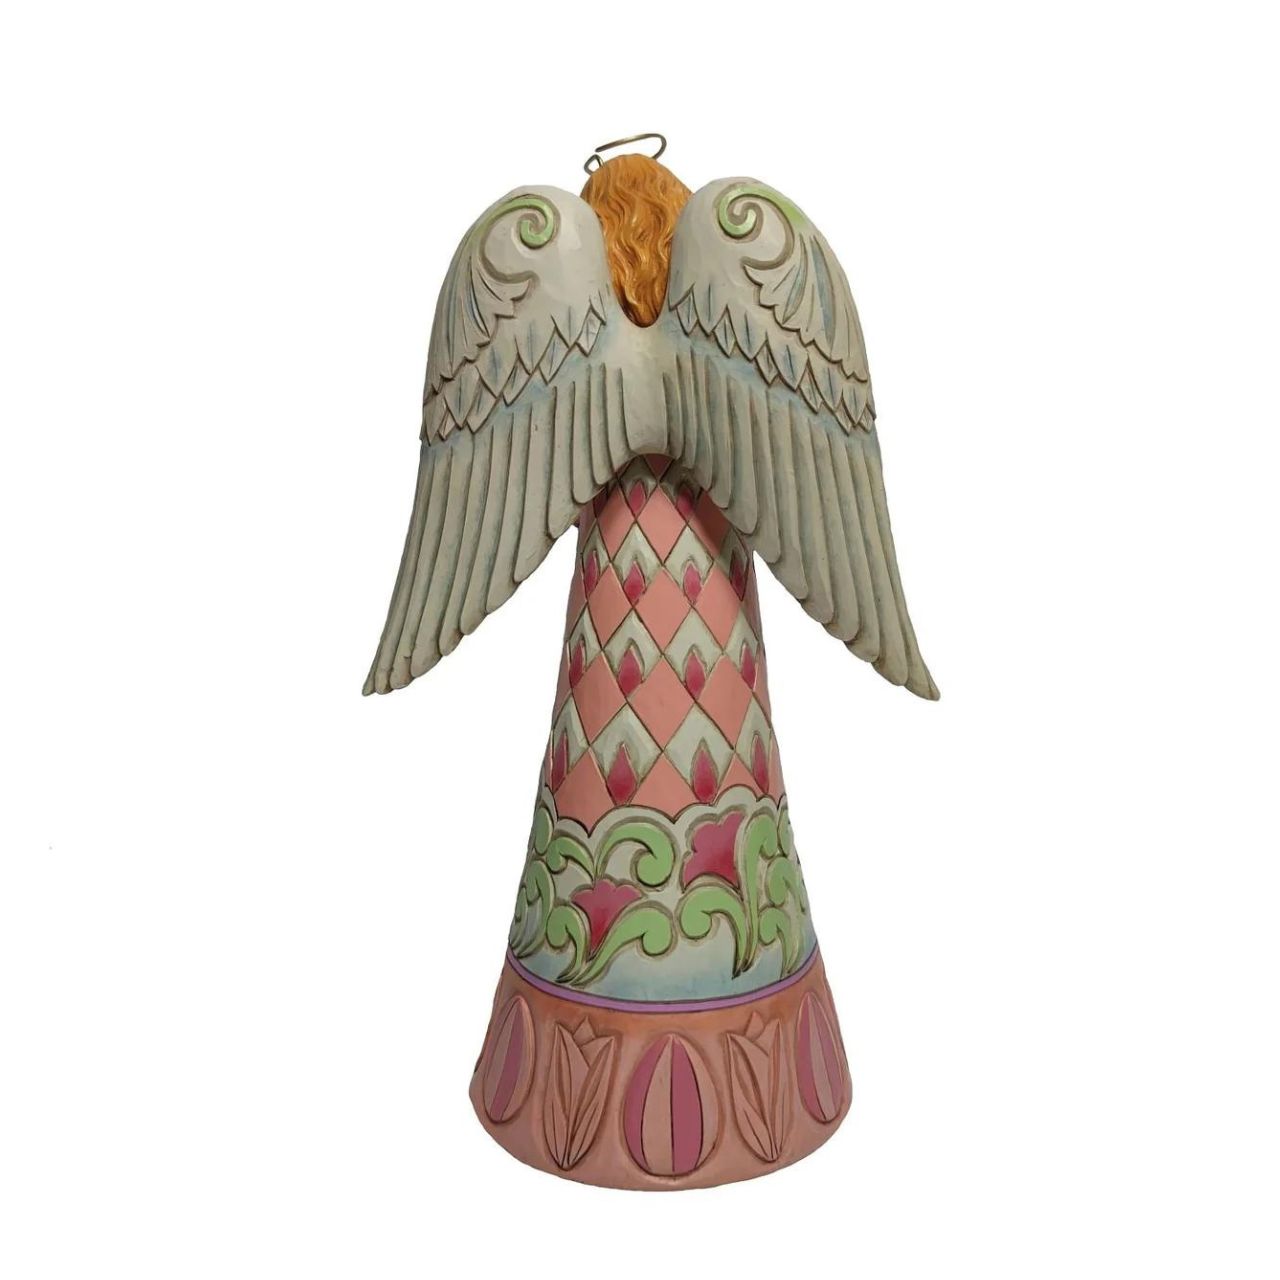 Jim Shore Angel with Easter Lilies and Doves Figurine  "Easter Faith" With an armful of Easter lilies, this brightly gowned angel blesses your home this Spring with grace and love. With a dress patterned in flowers and cheery colours, she admires a dove and reflects on the great blessings the Lord delivered on Easter.